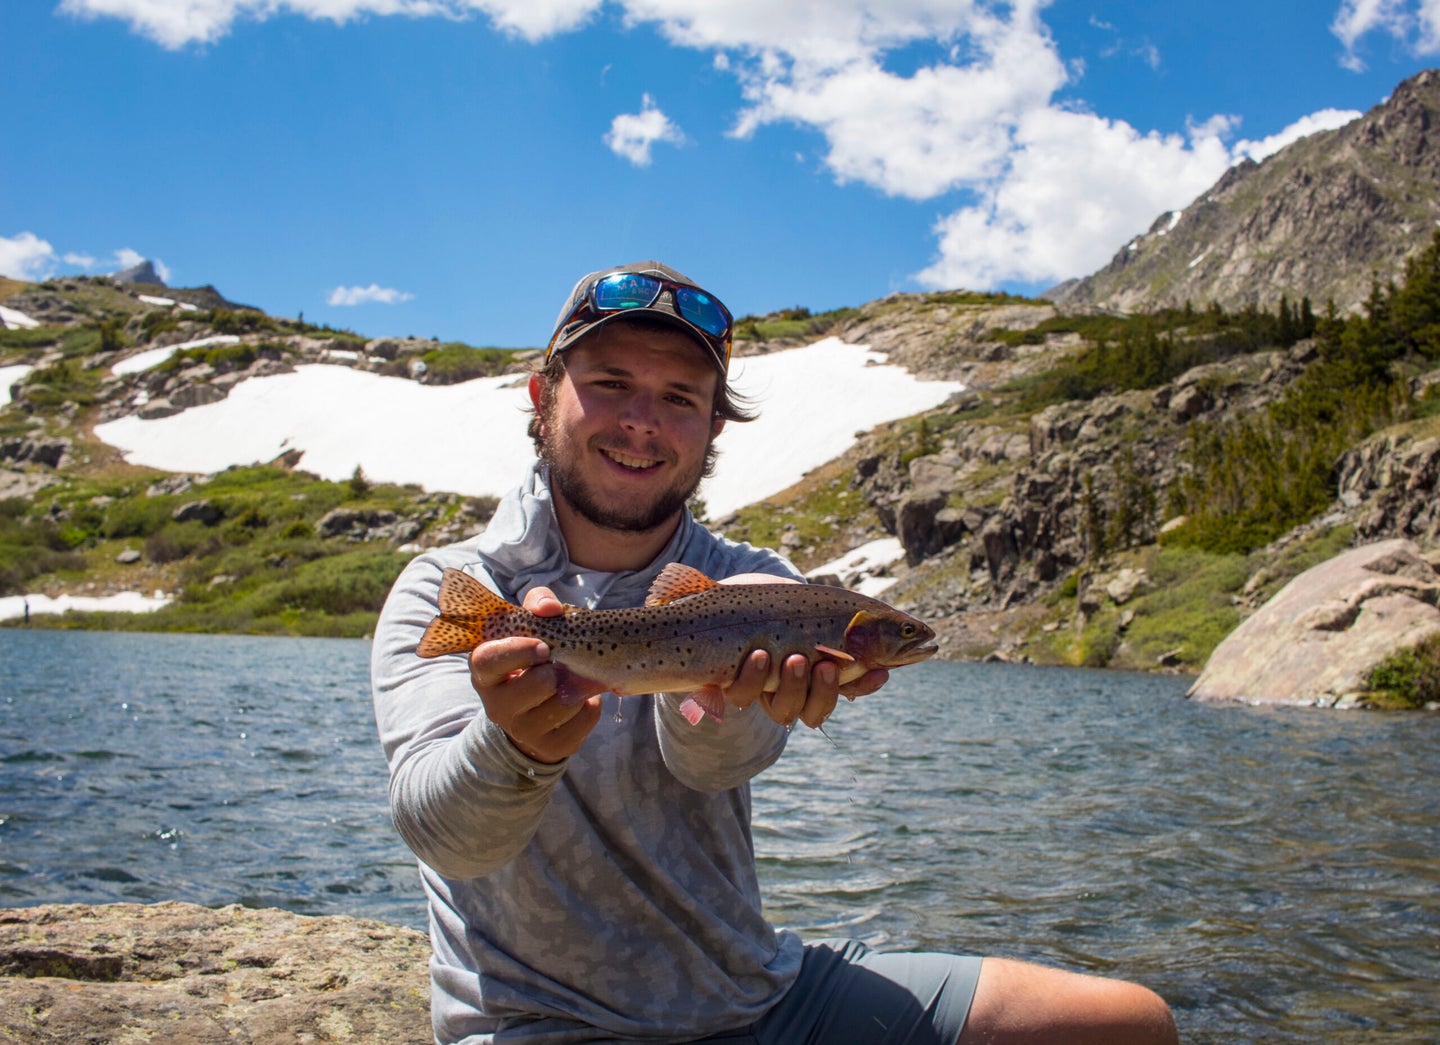 The author with a Colorado Cutthroat caught at an alpine lake.